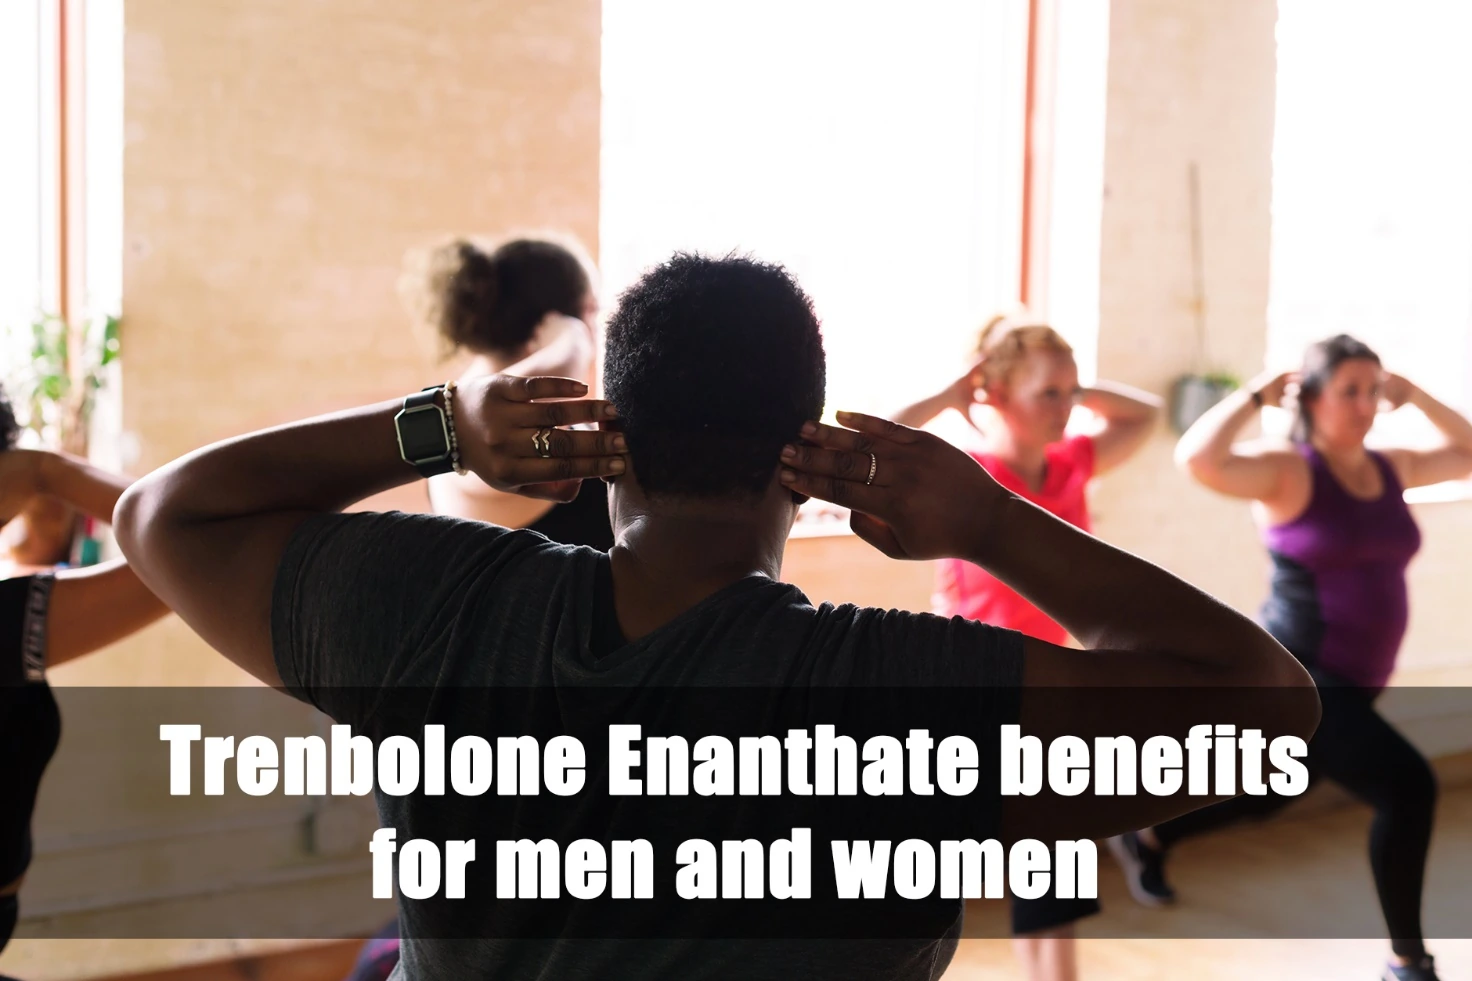 Trenbolone Enanthate benefits for everyone